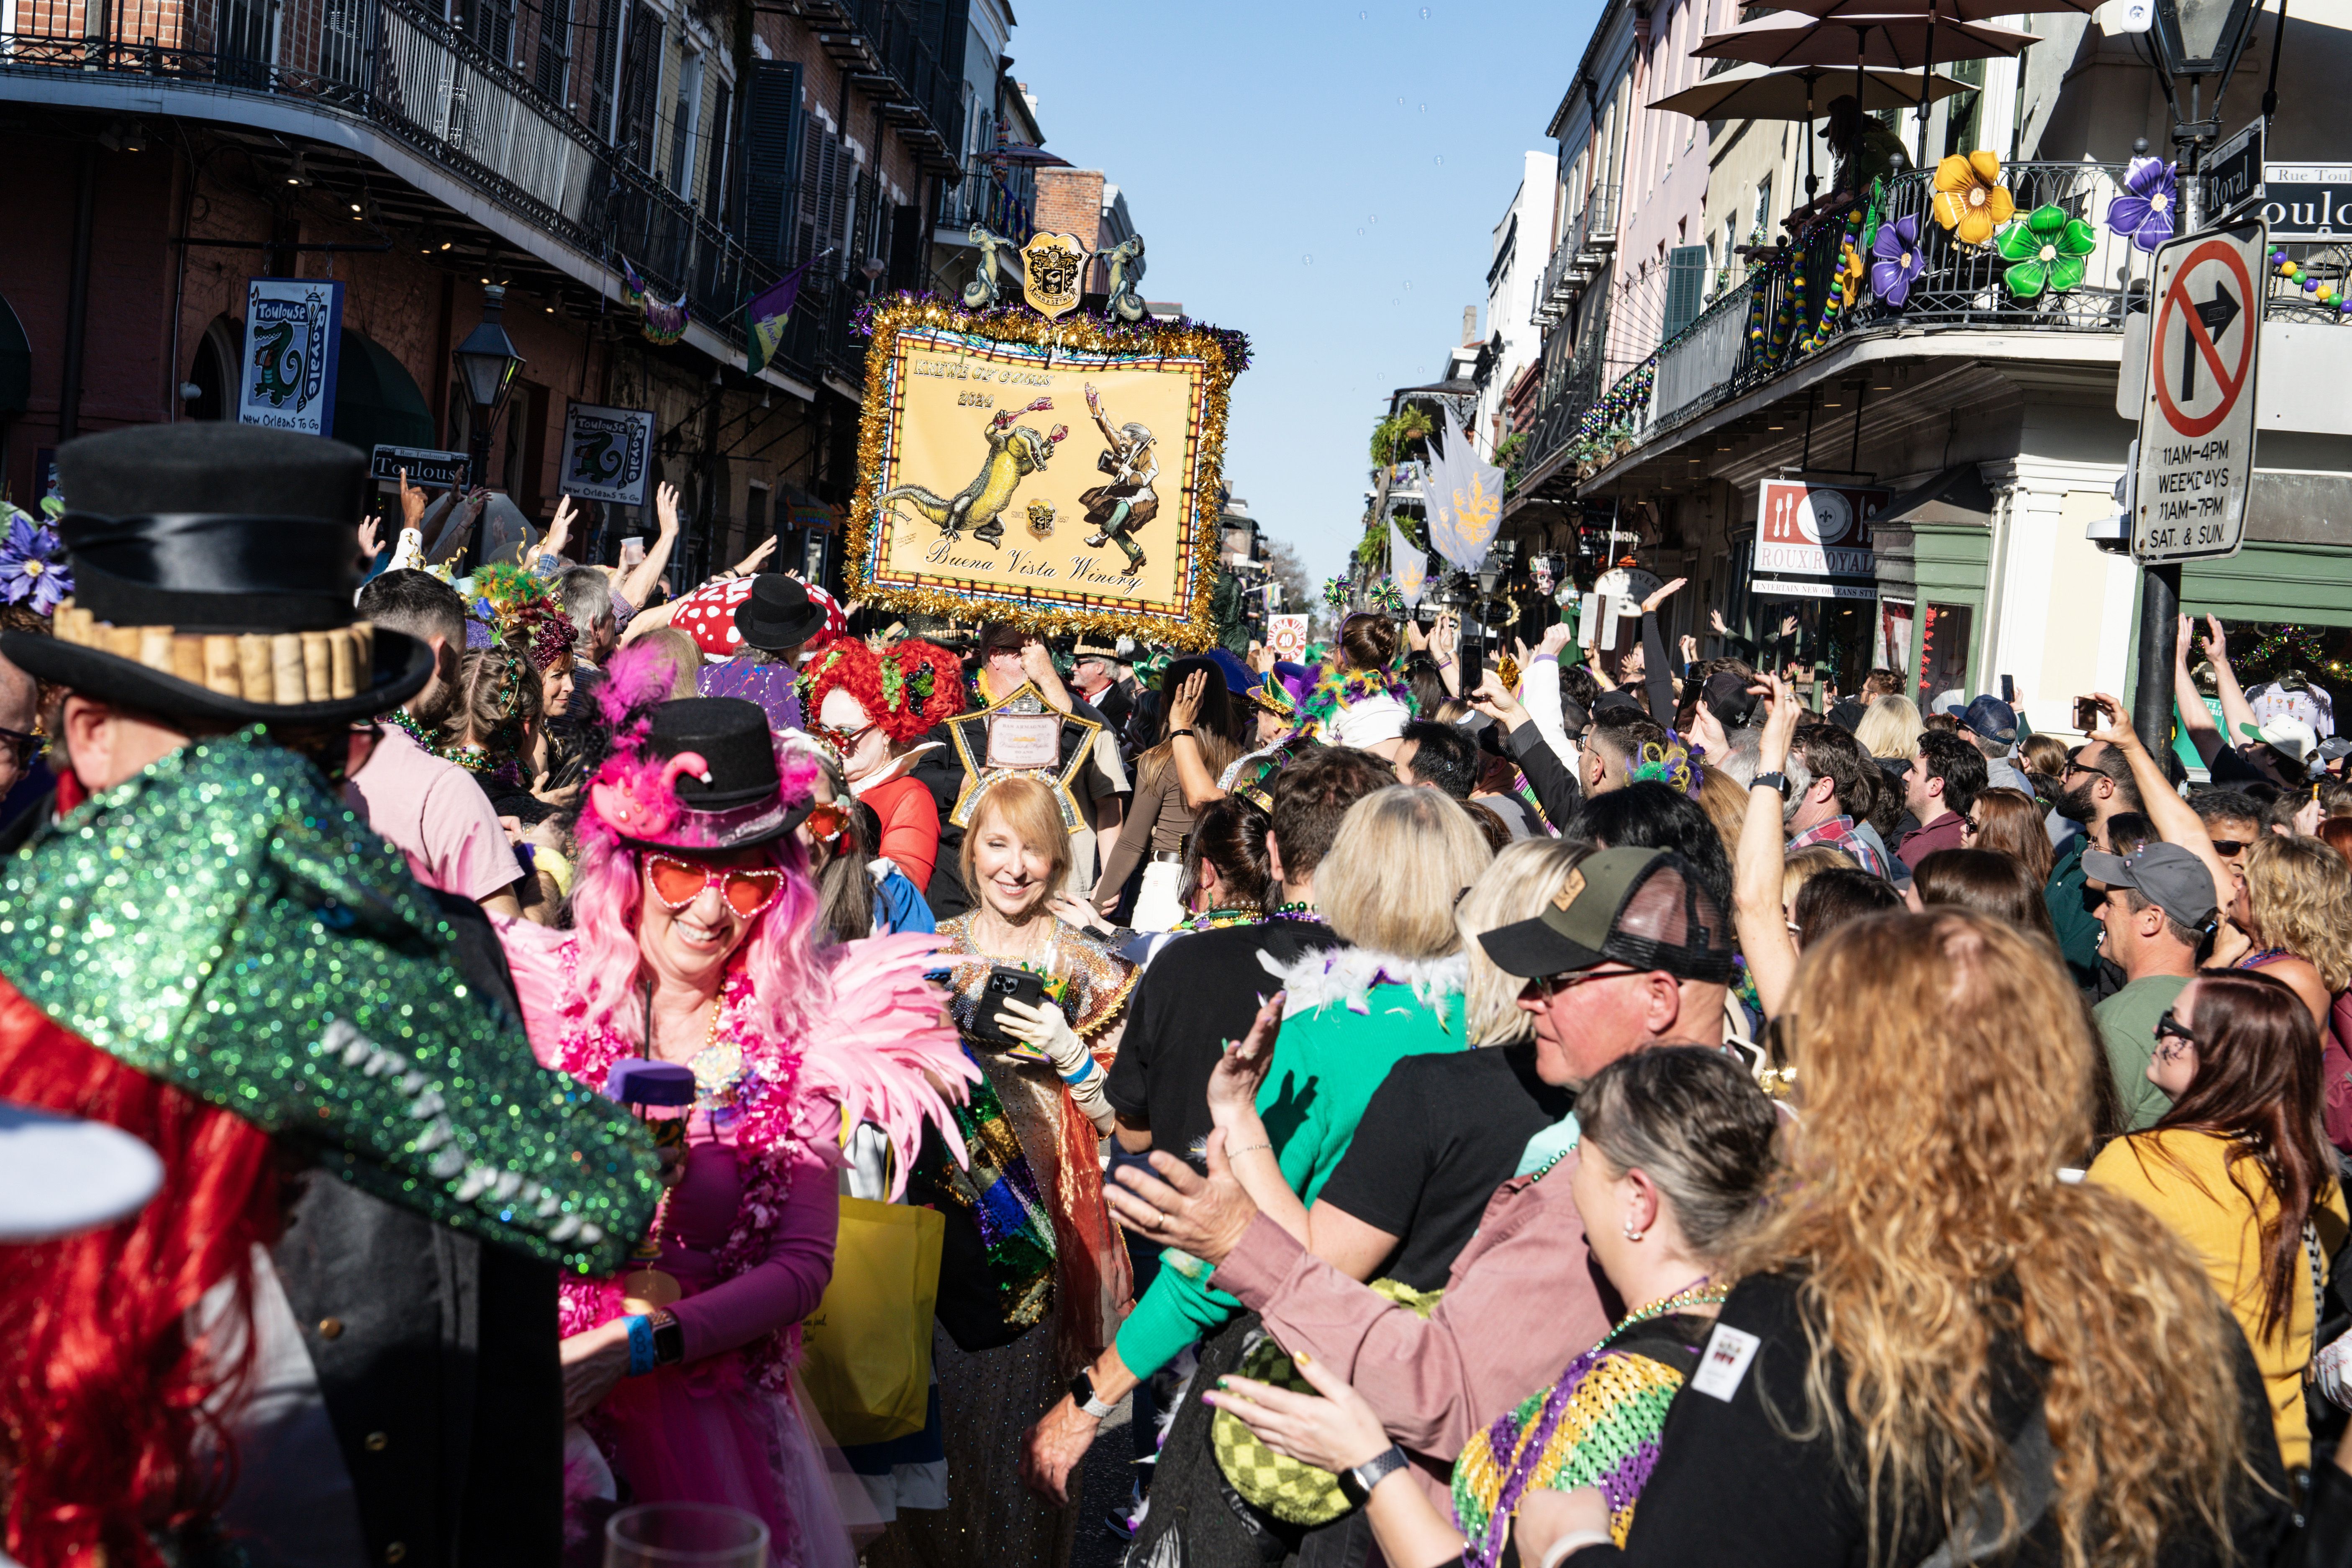 A scene shot of the Krewe of Cork parading in the French Quarter.